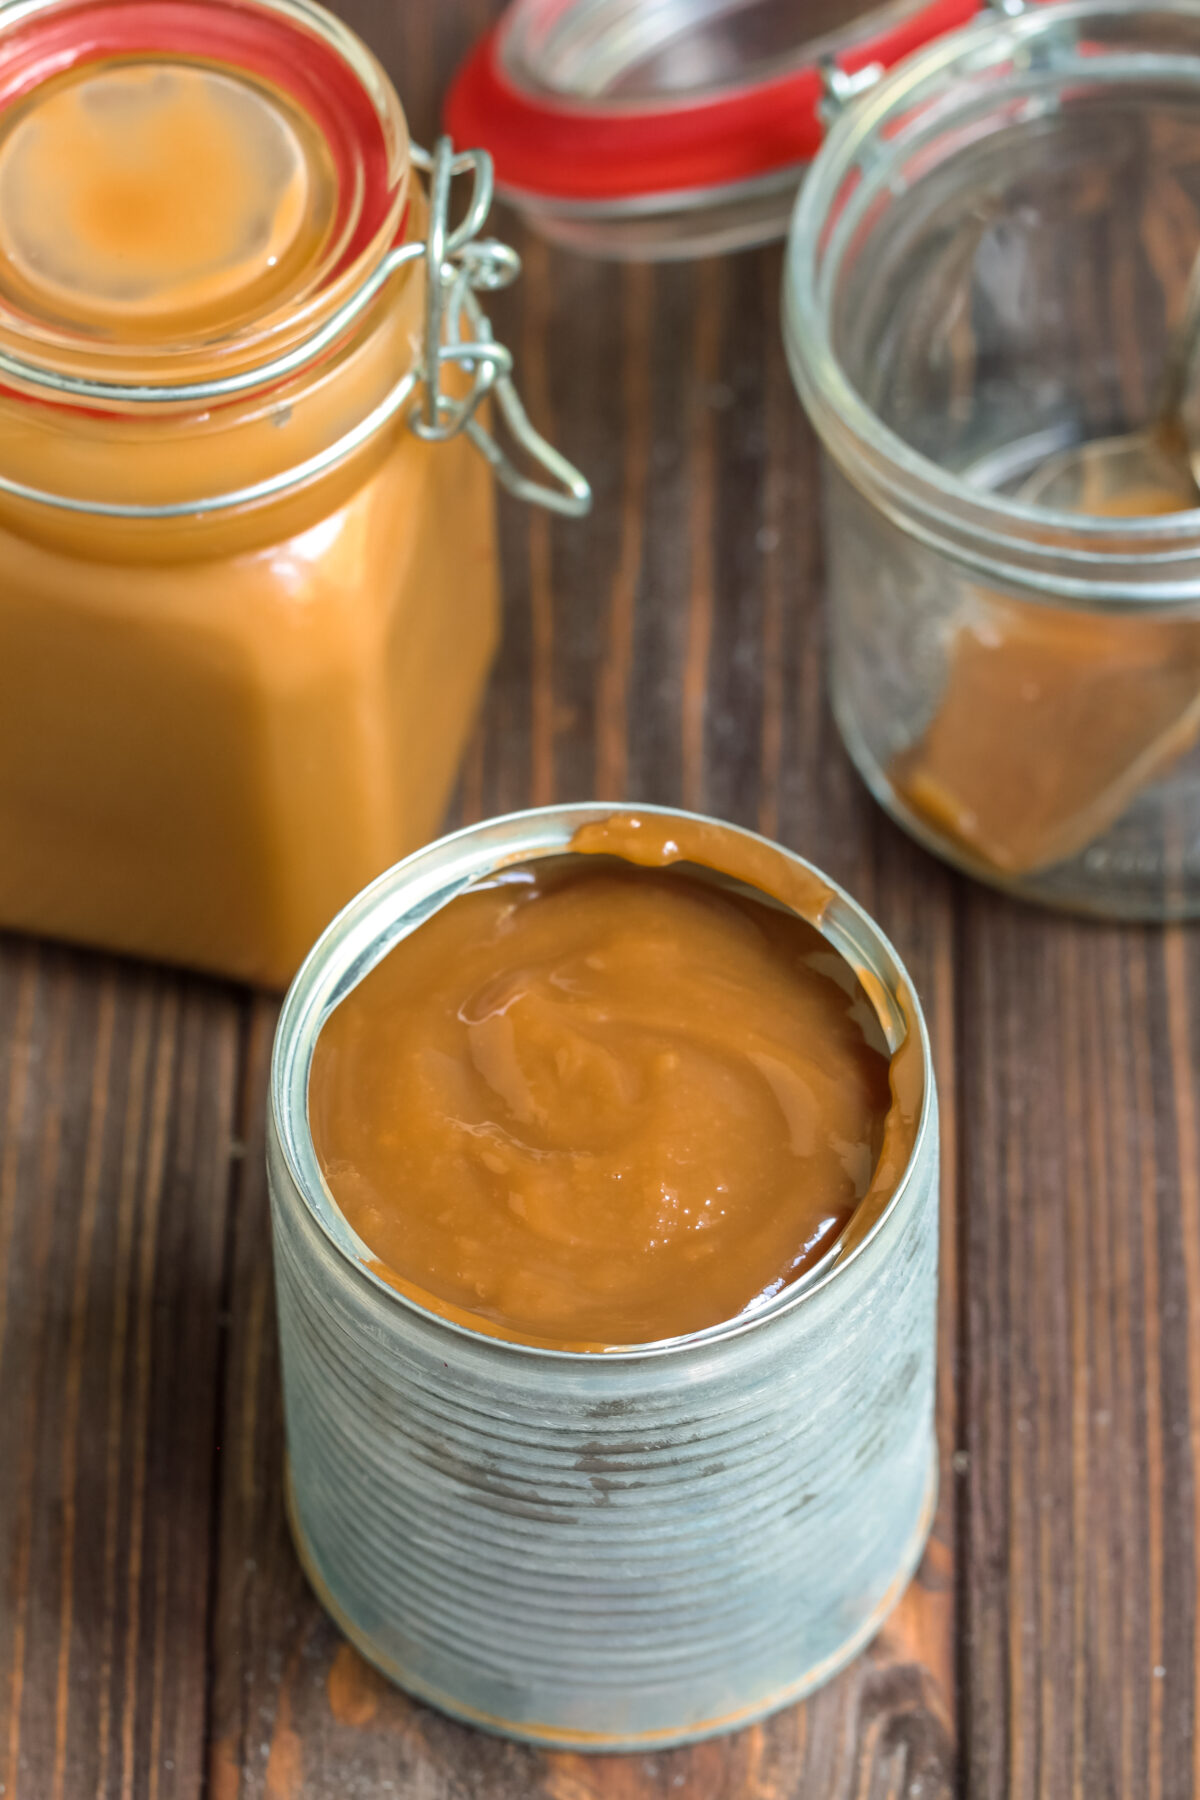 Find out how to make your own delicious dulce de leche using condensed milk with this easy recipe. You'll be licking your spoon in no time!